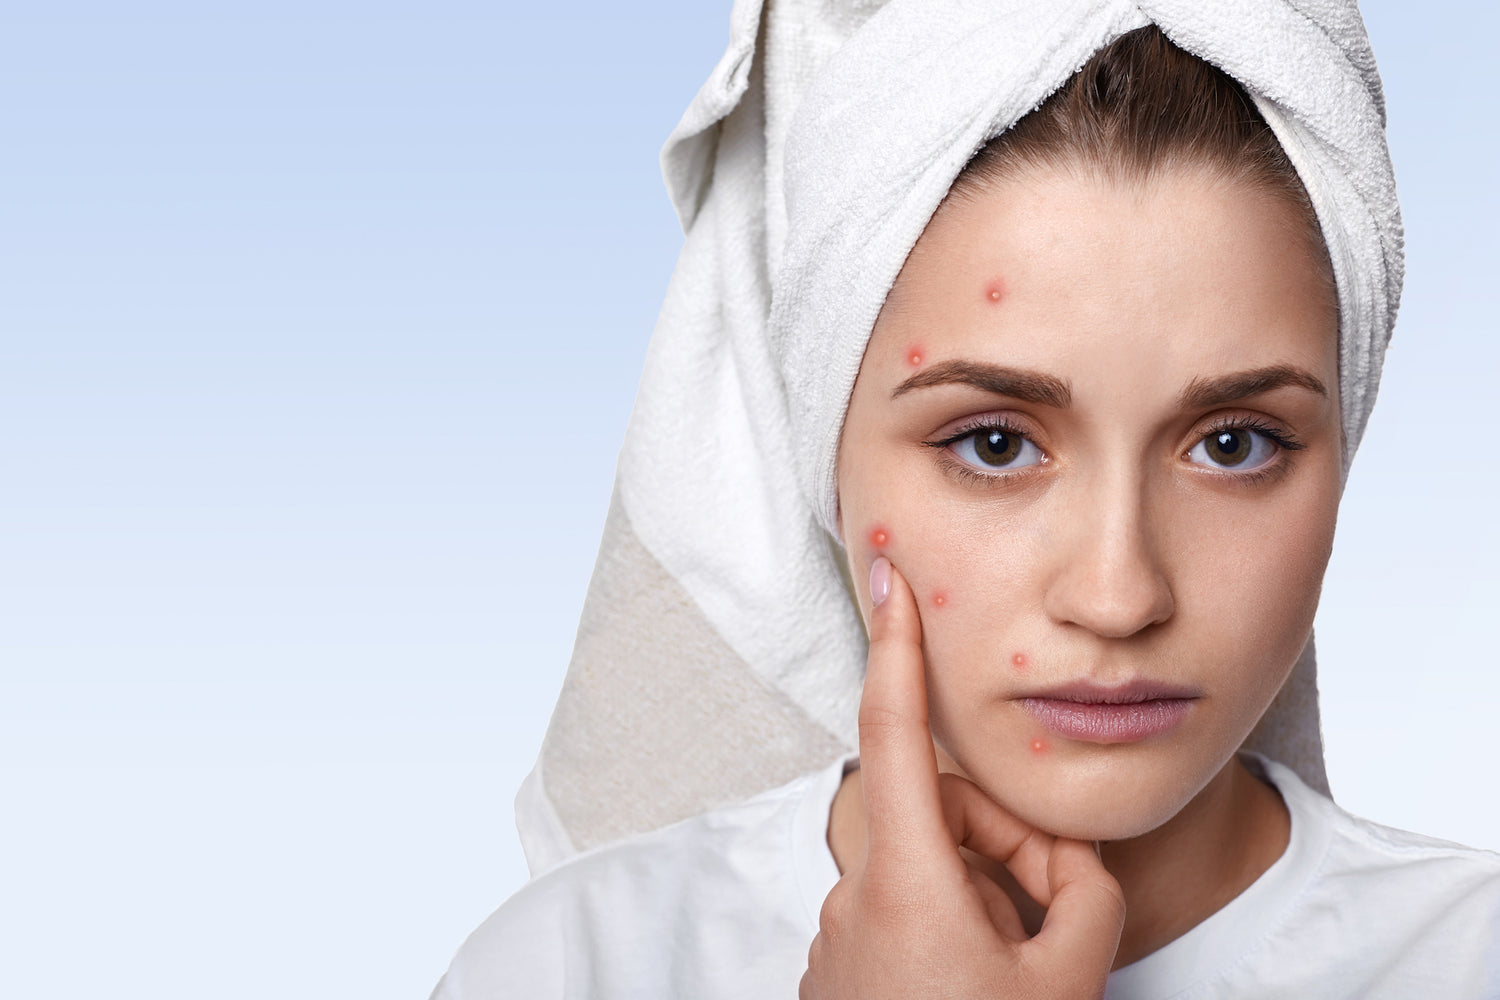 Struggling with Summer Acne? Learn about the types, causes, and effective treatments.